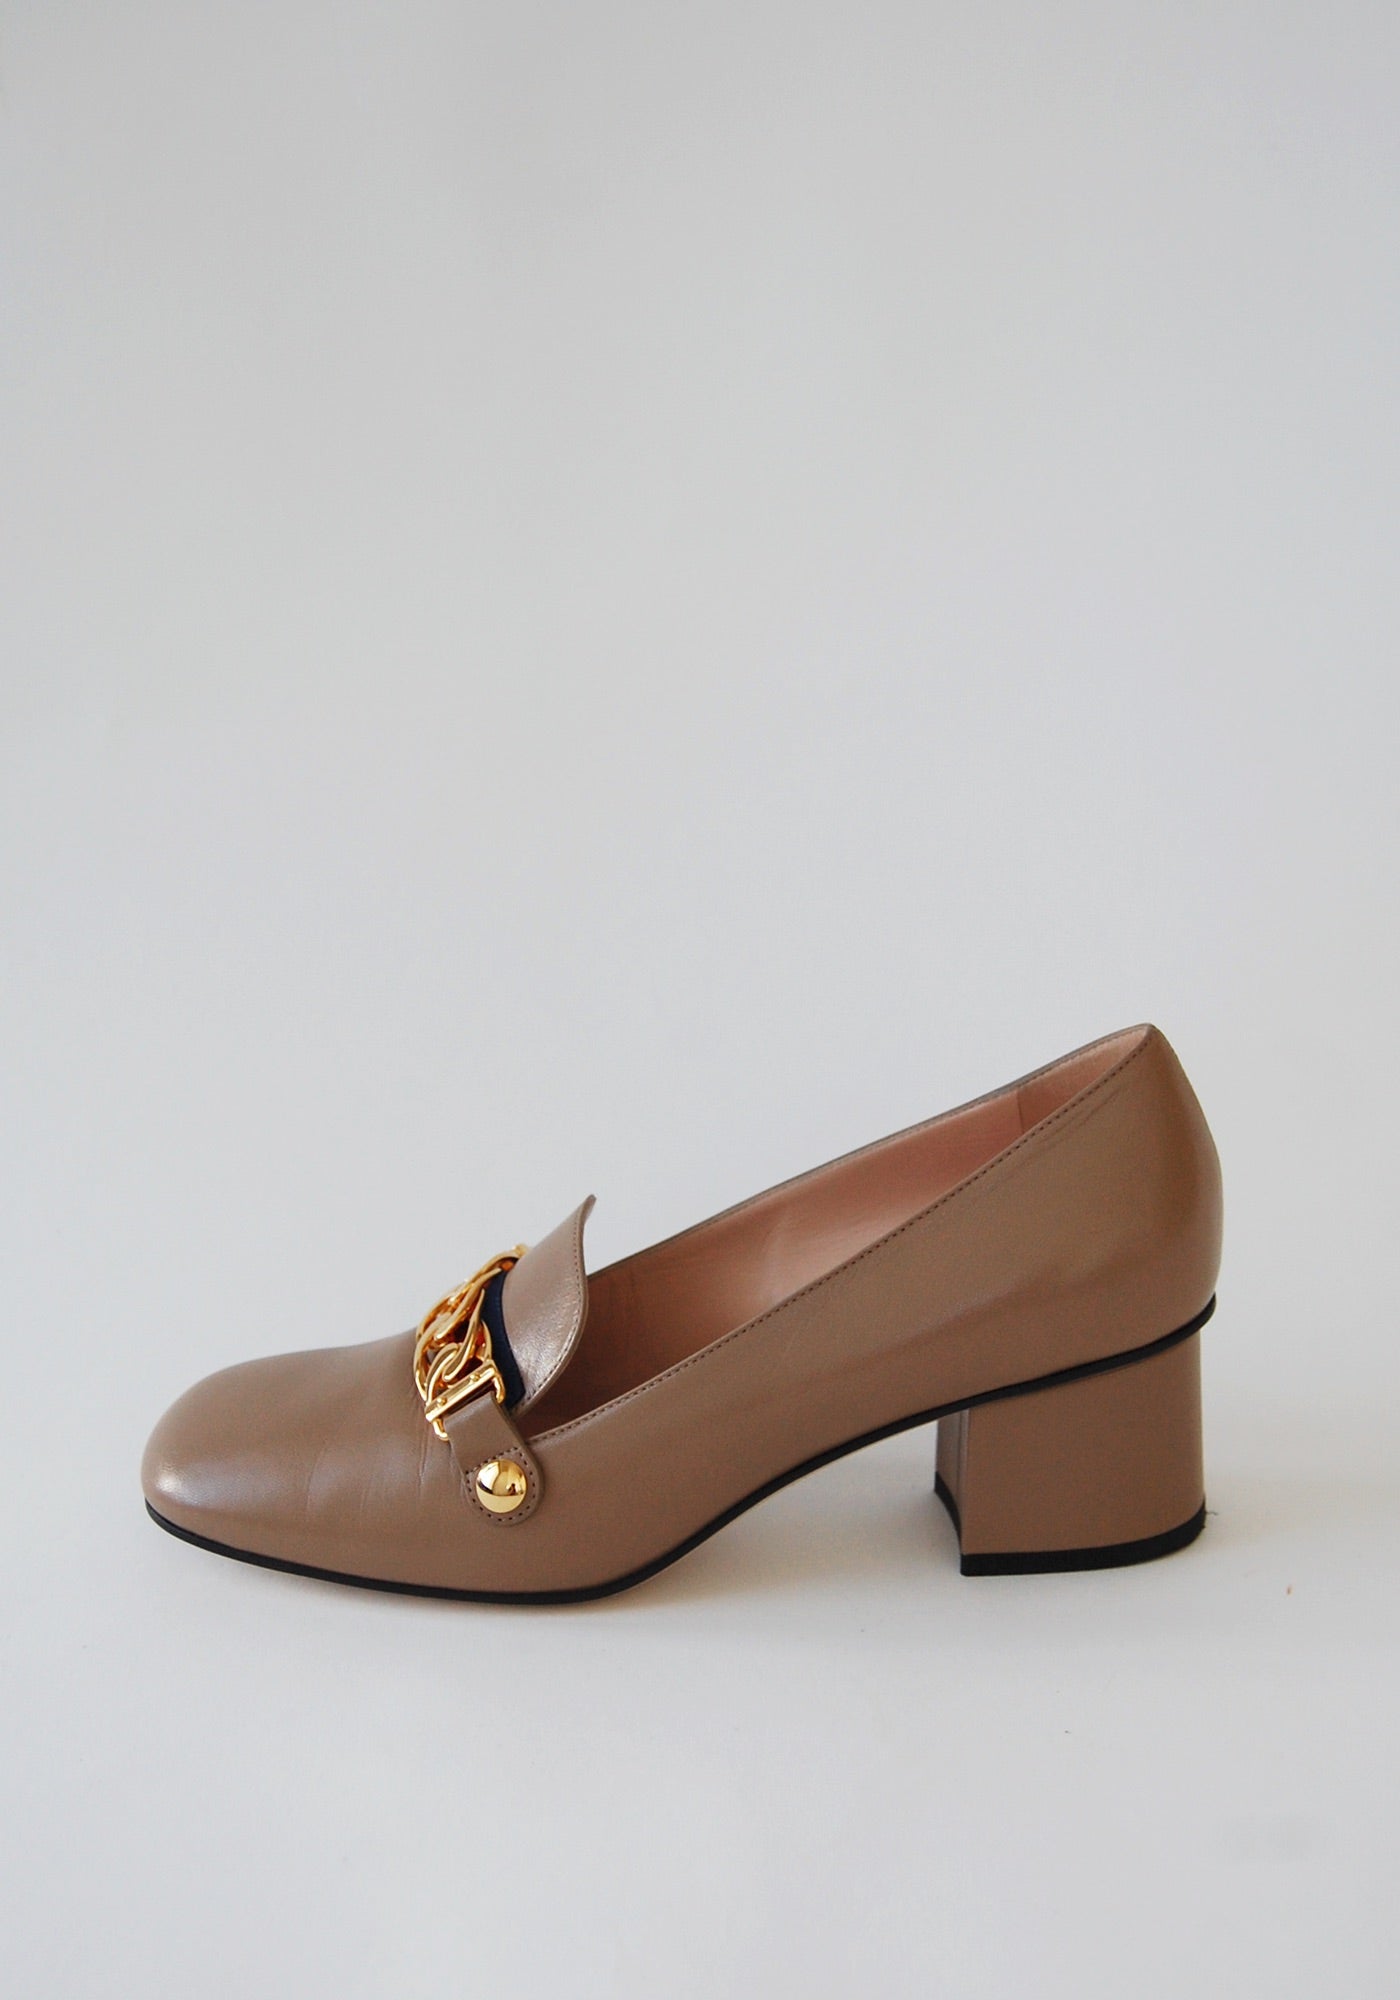 Gucci Tan Heeled Loafers | Size: 39